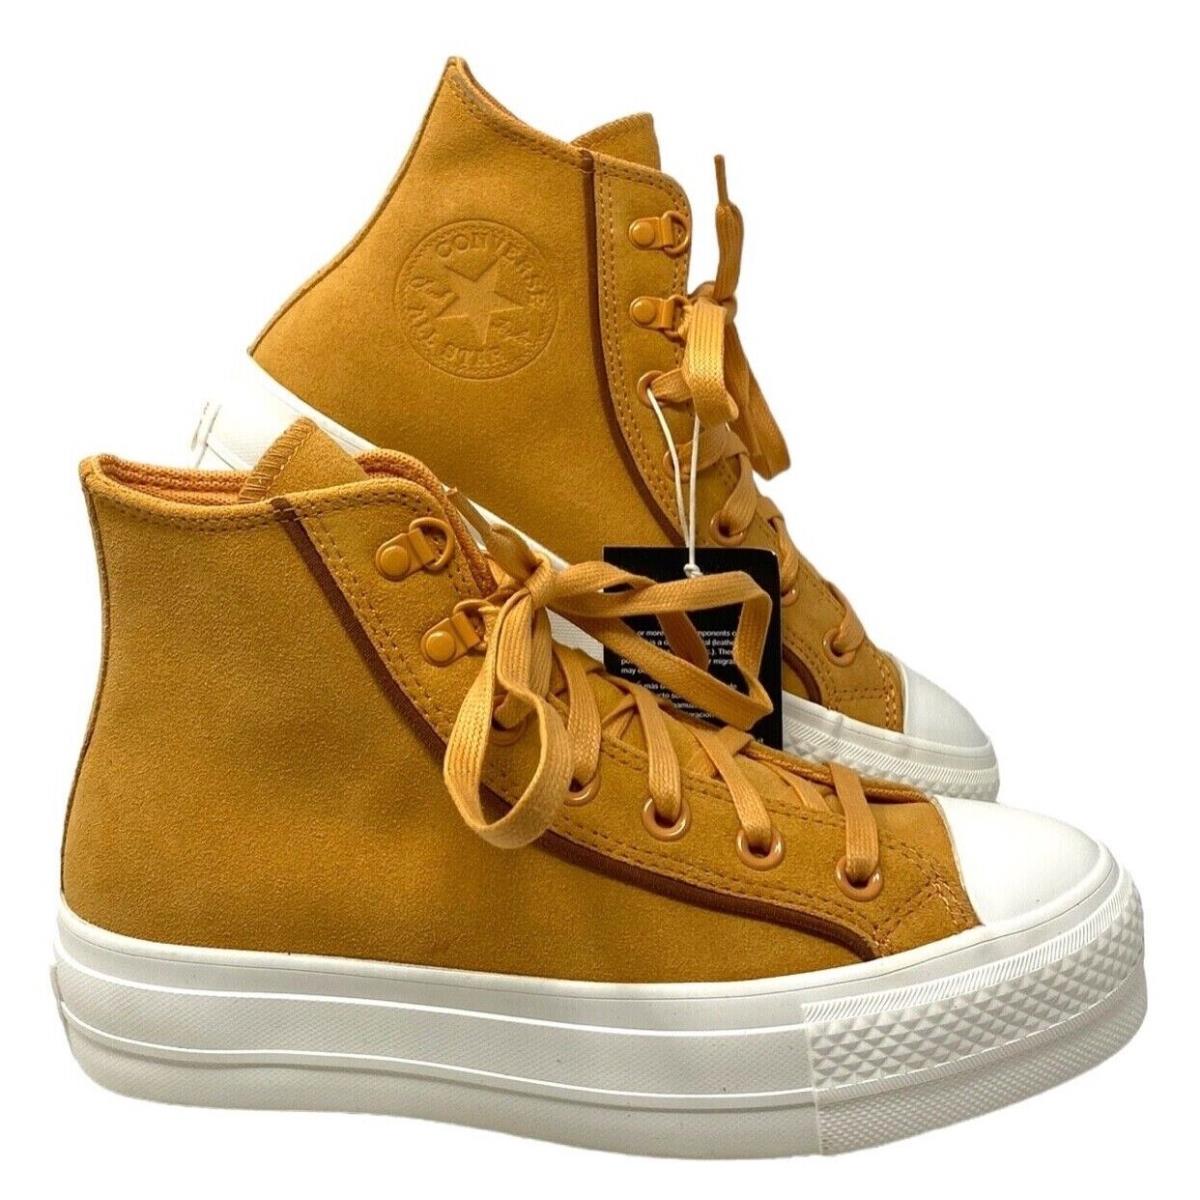 Converse Lift Platform Suede High Shoes Tiger Moth Casual Women Sneakers A05419C